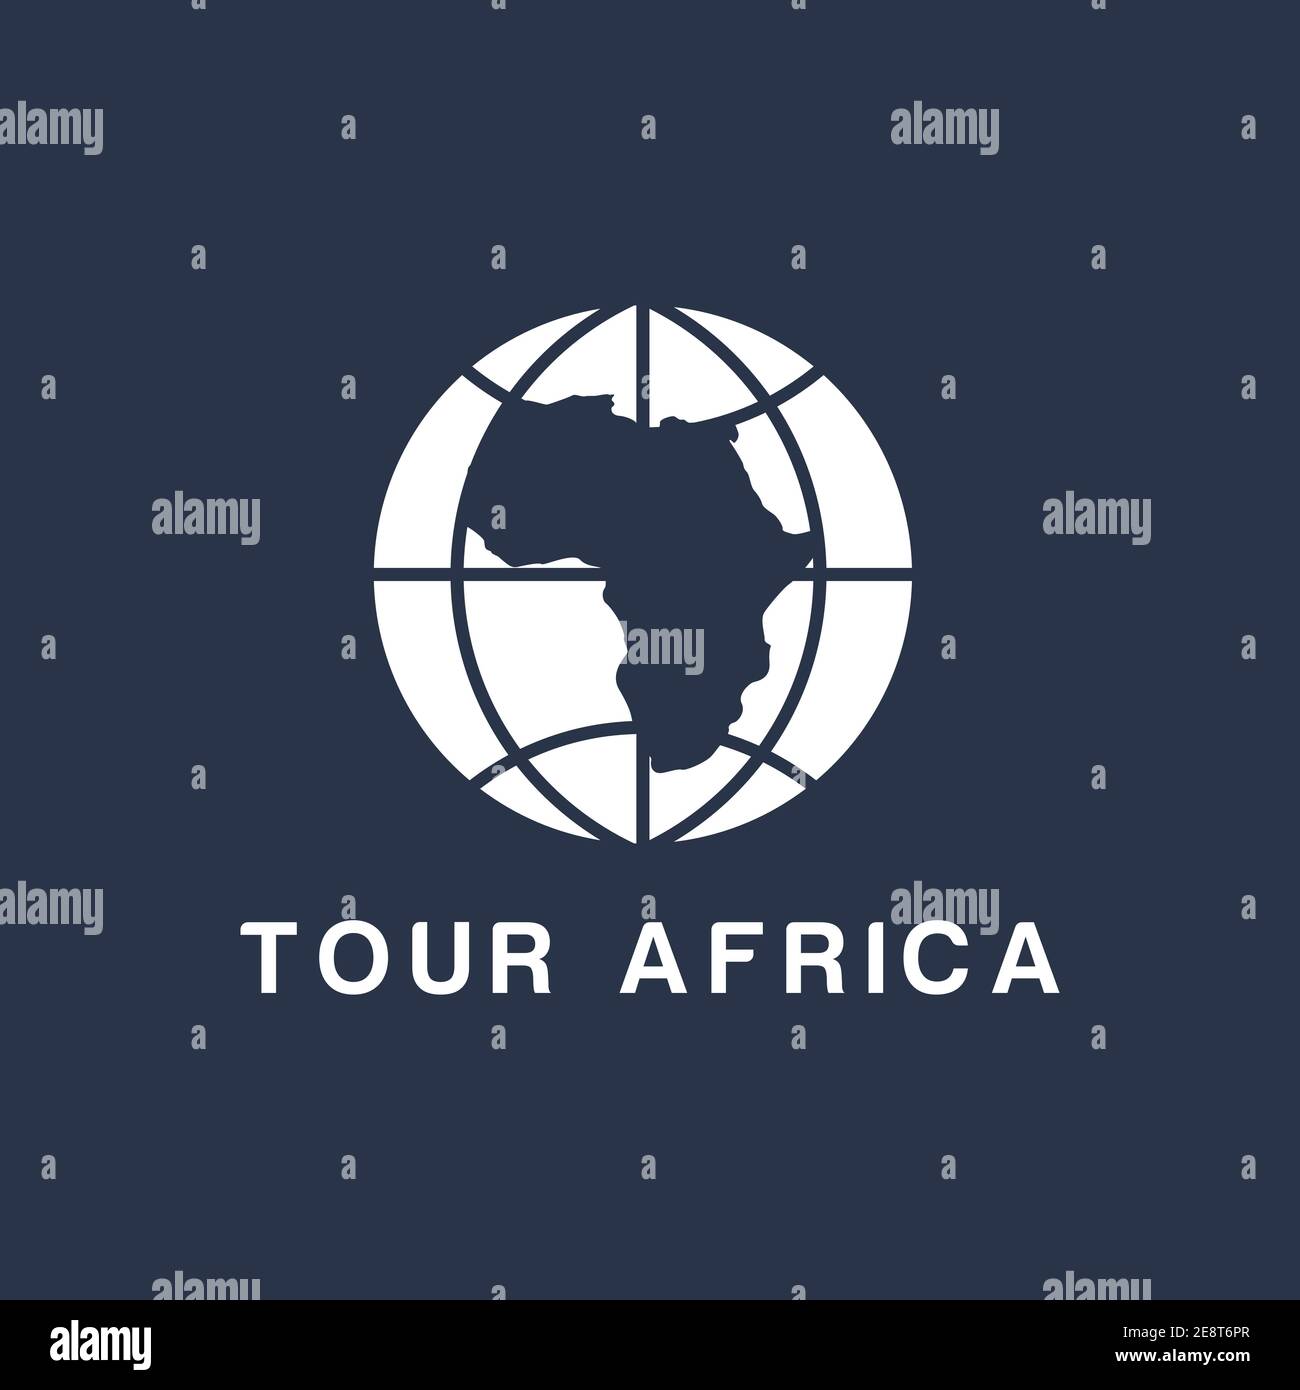 WORLD SYMBOL LOGO WITH AFRICAN MAP WITH NEGATIVE SPACES Stock Vector